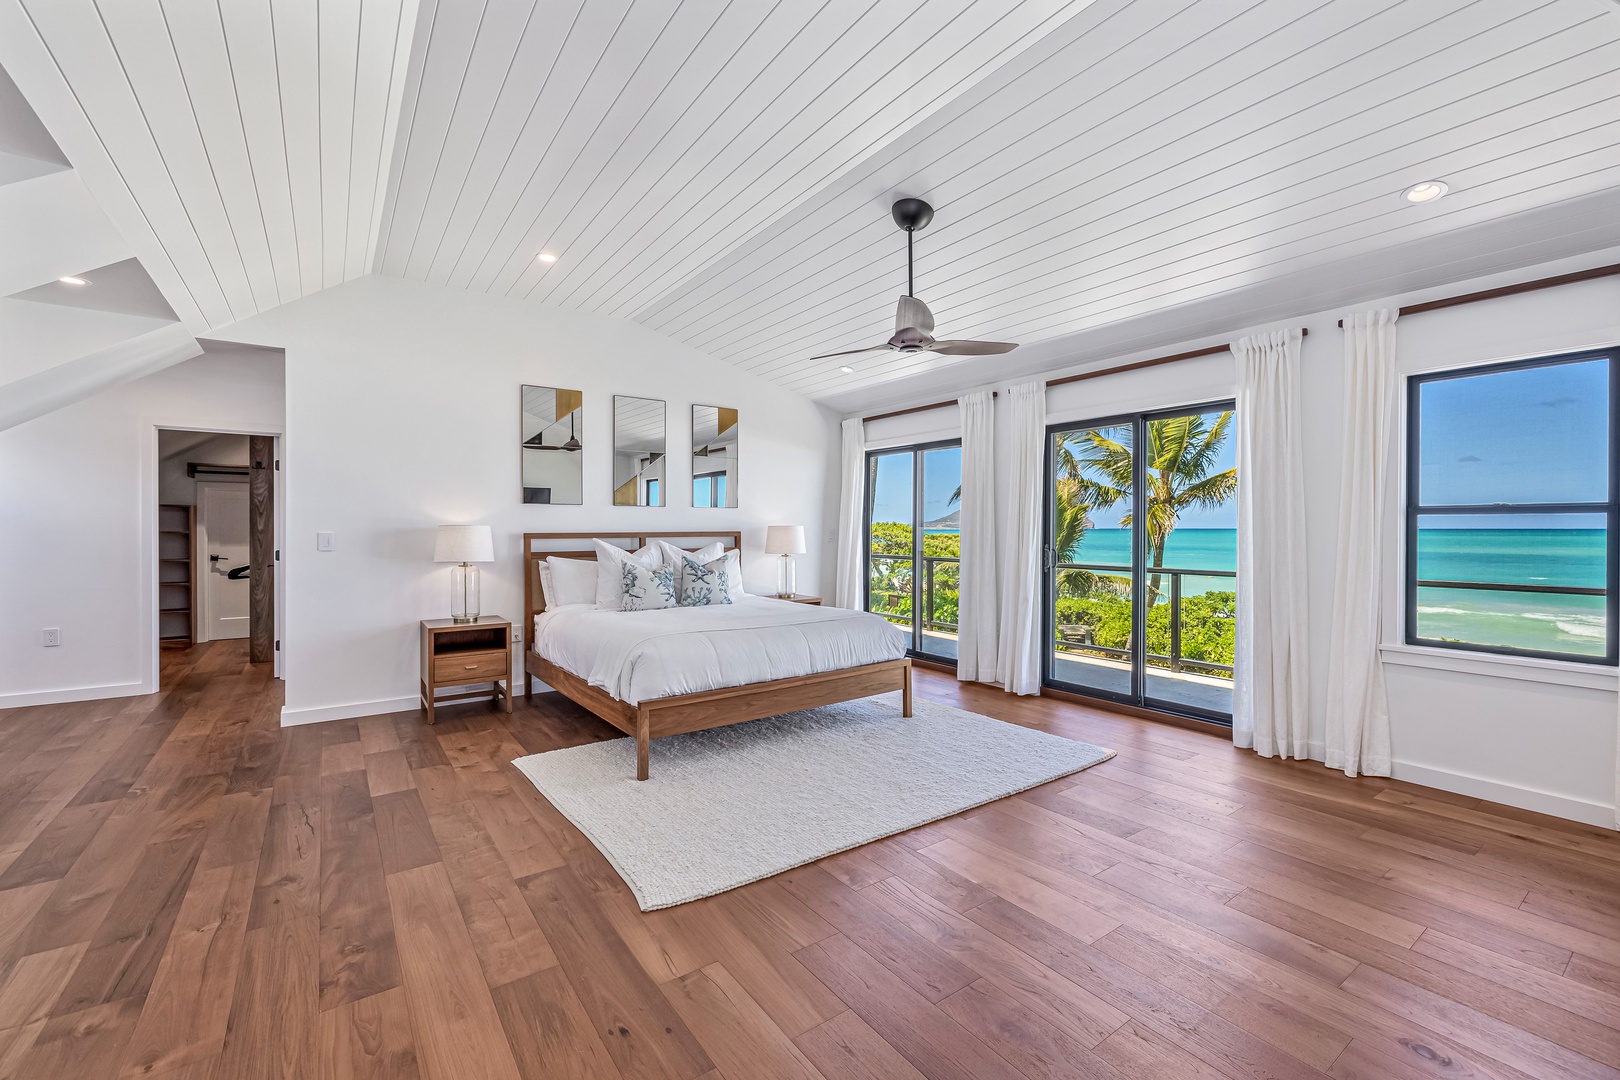 Kailua Vacation Rentals, Kailua Beach Villa - Retreat in the primary suite's king bed, cooled by a fandelier and modern split AC.